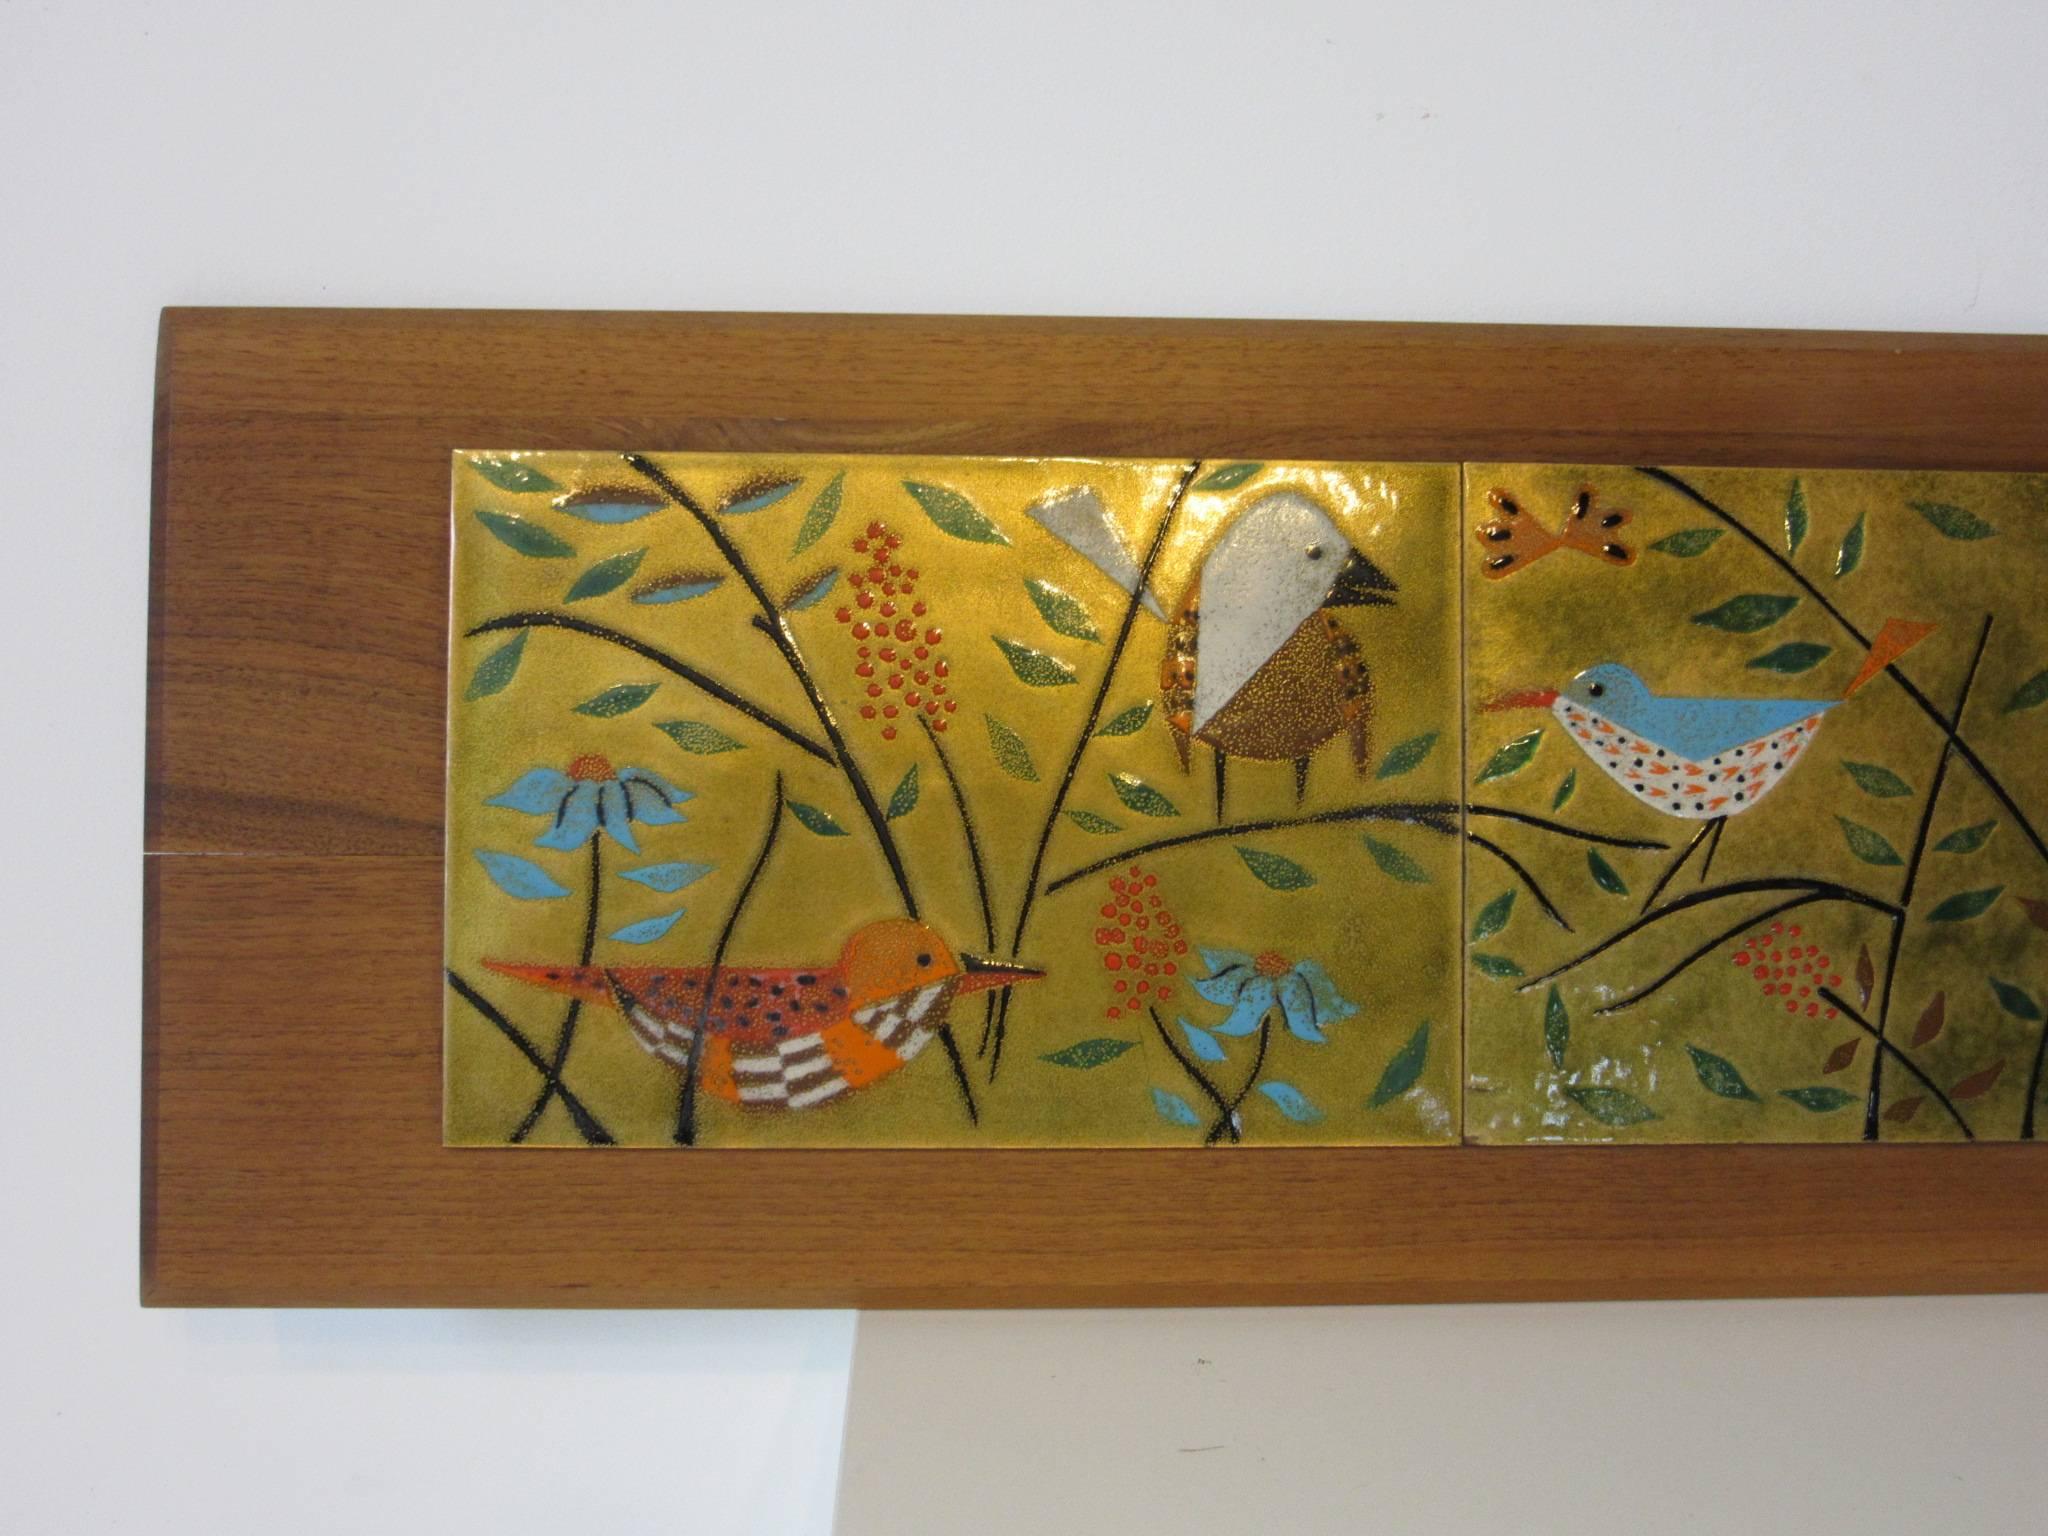 A colorful copper enameled Danish panel depicting birds in their natural setting, mounted on a dark walnut wood backing with beveled edges and hangers to the verso.